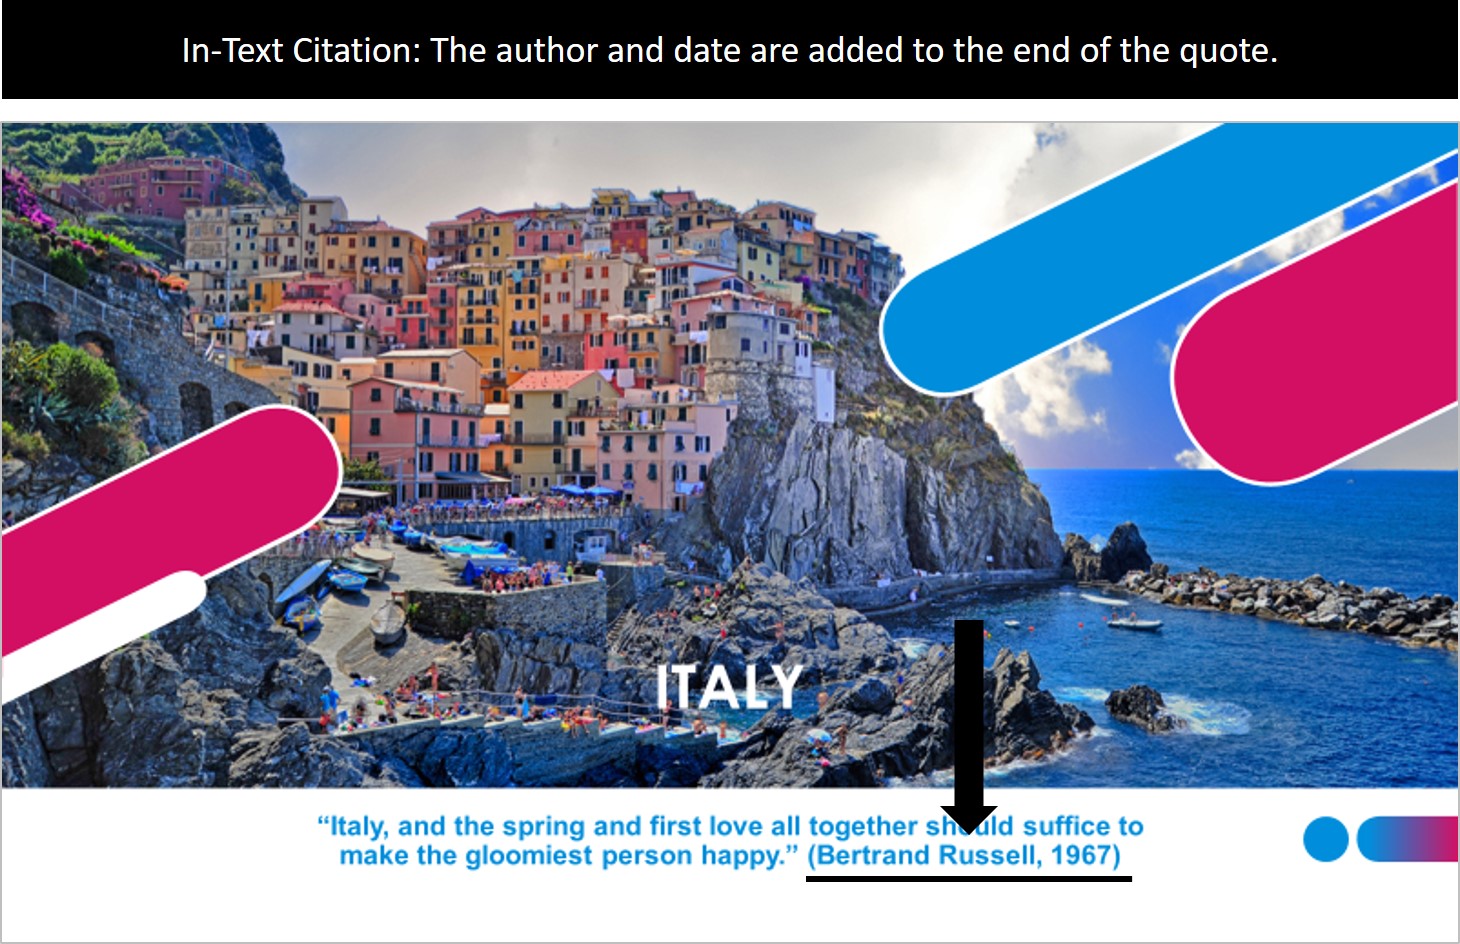 An example slide that uses in-text citation to quote an author.